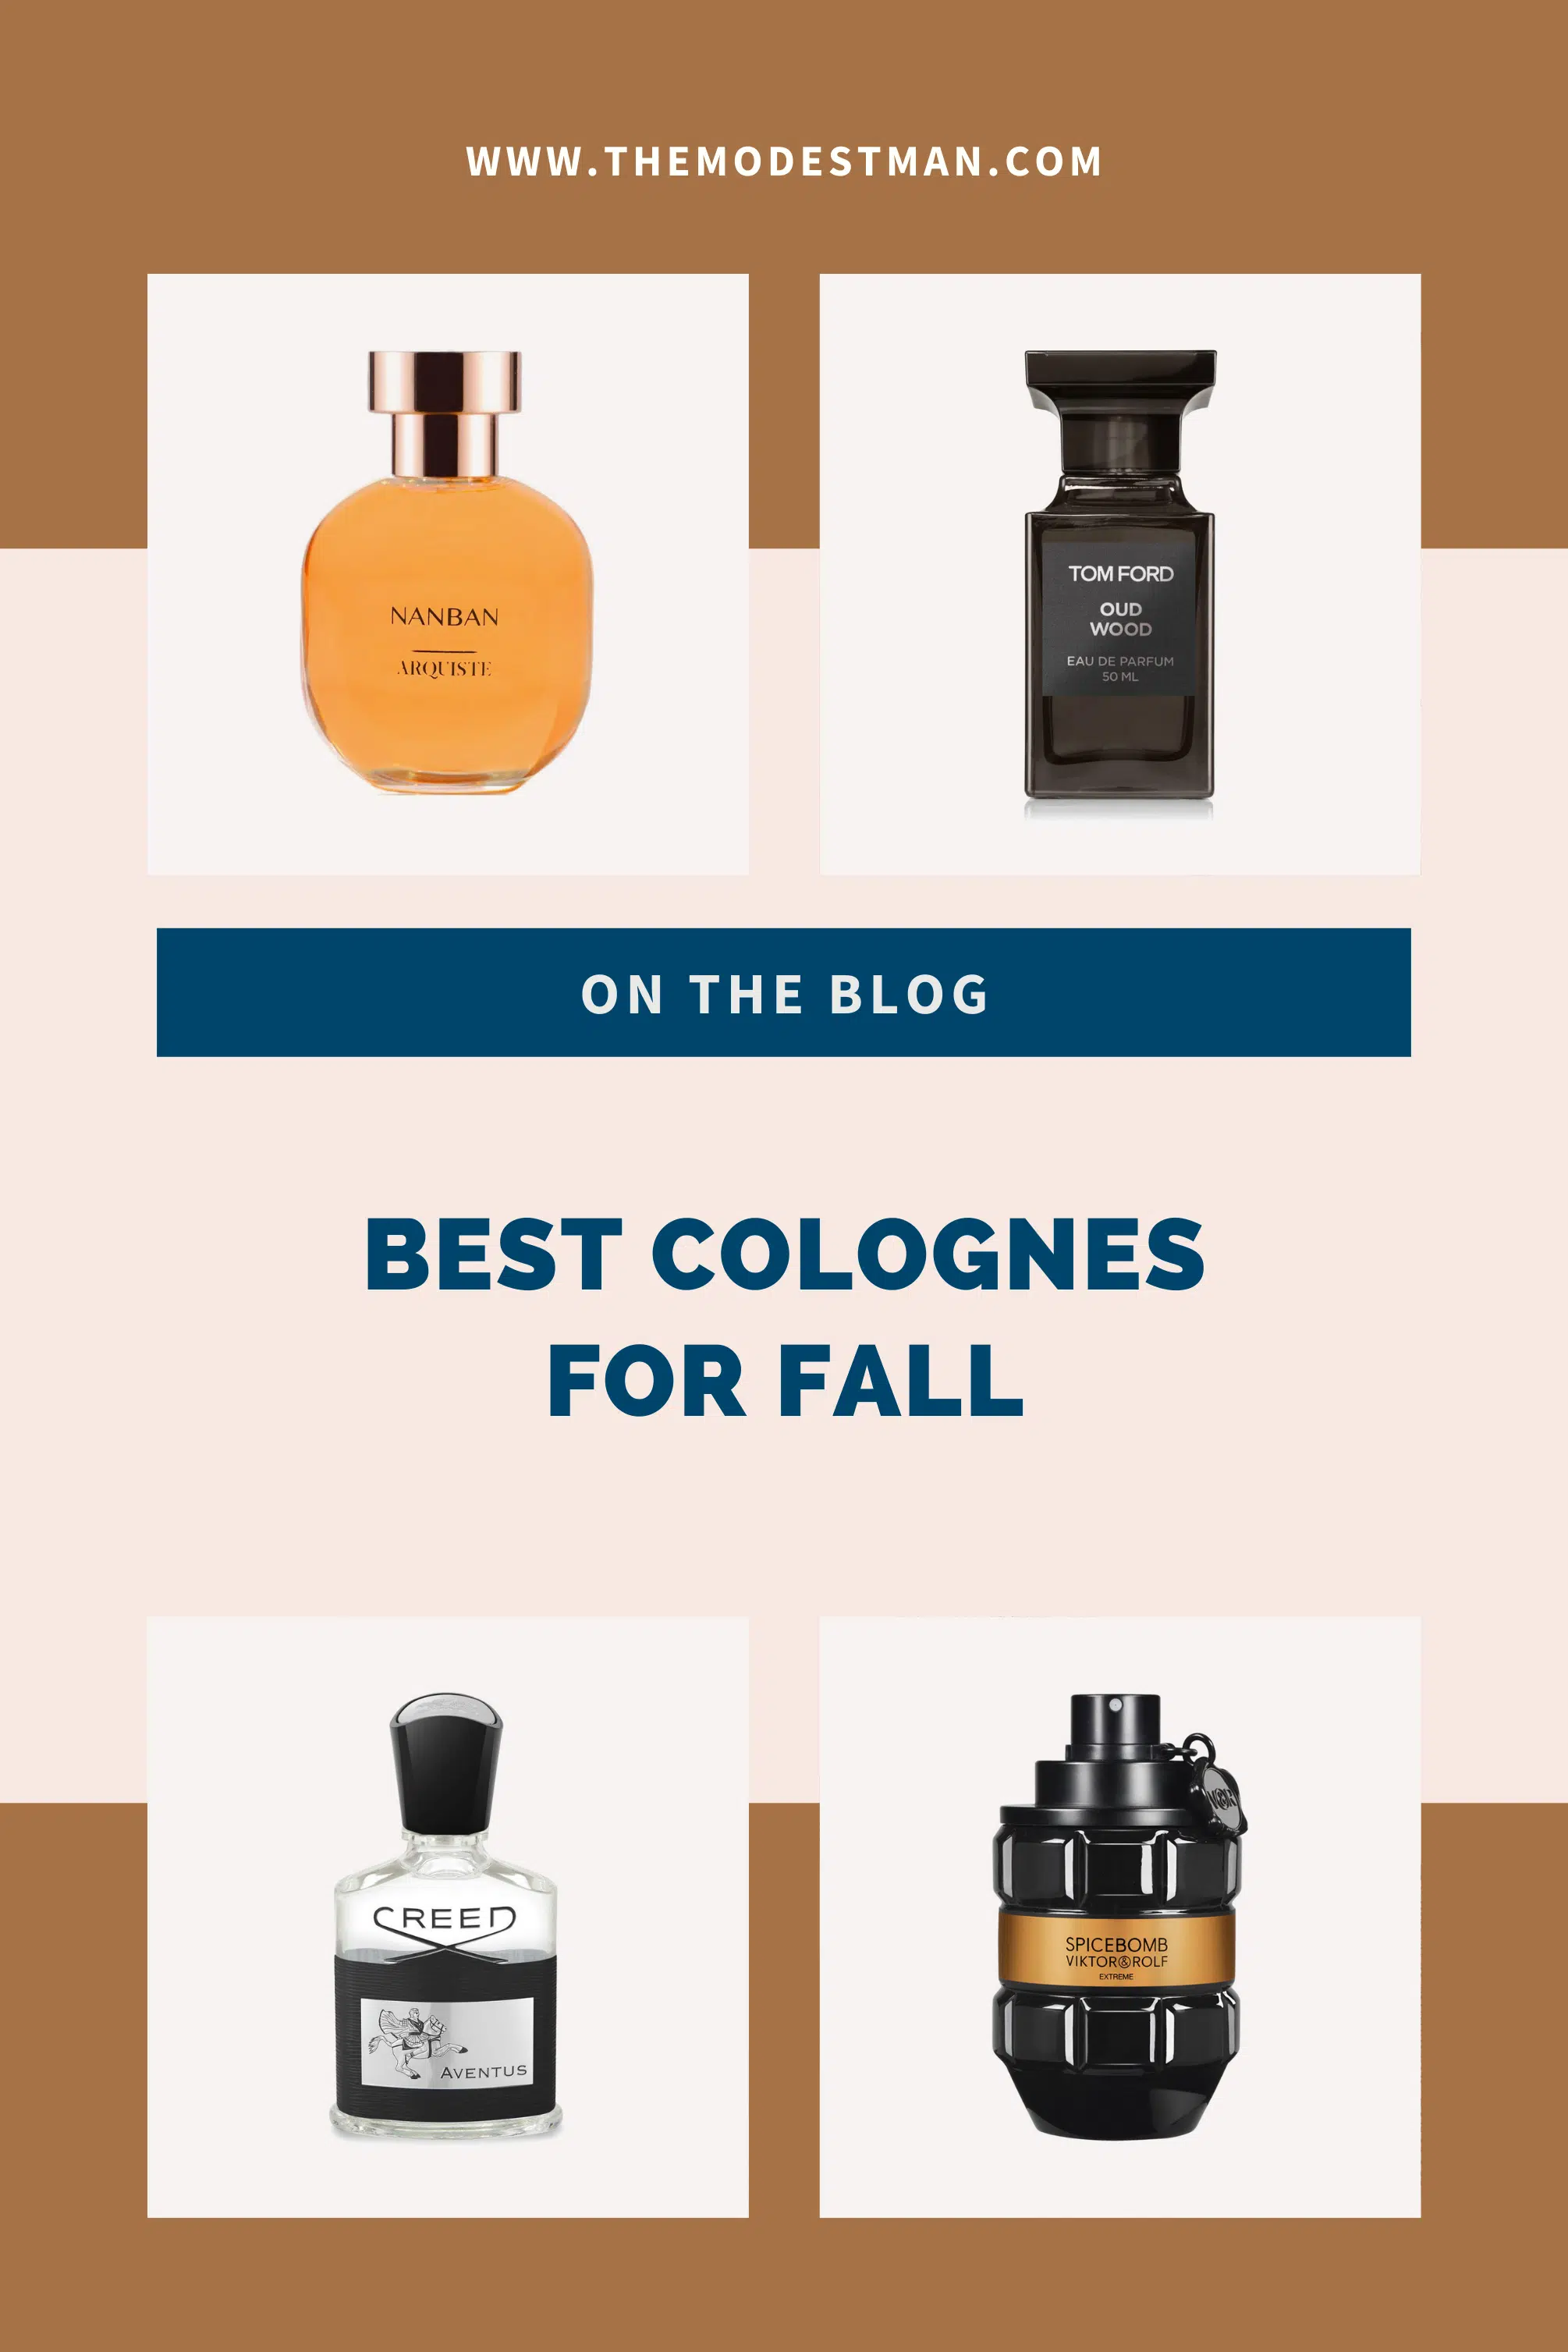 Best colognes for fall